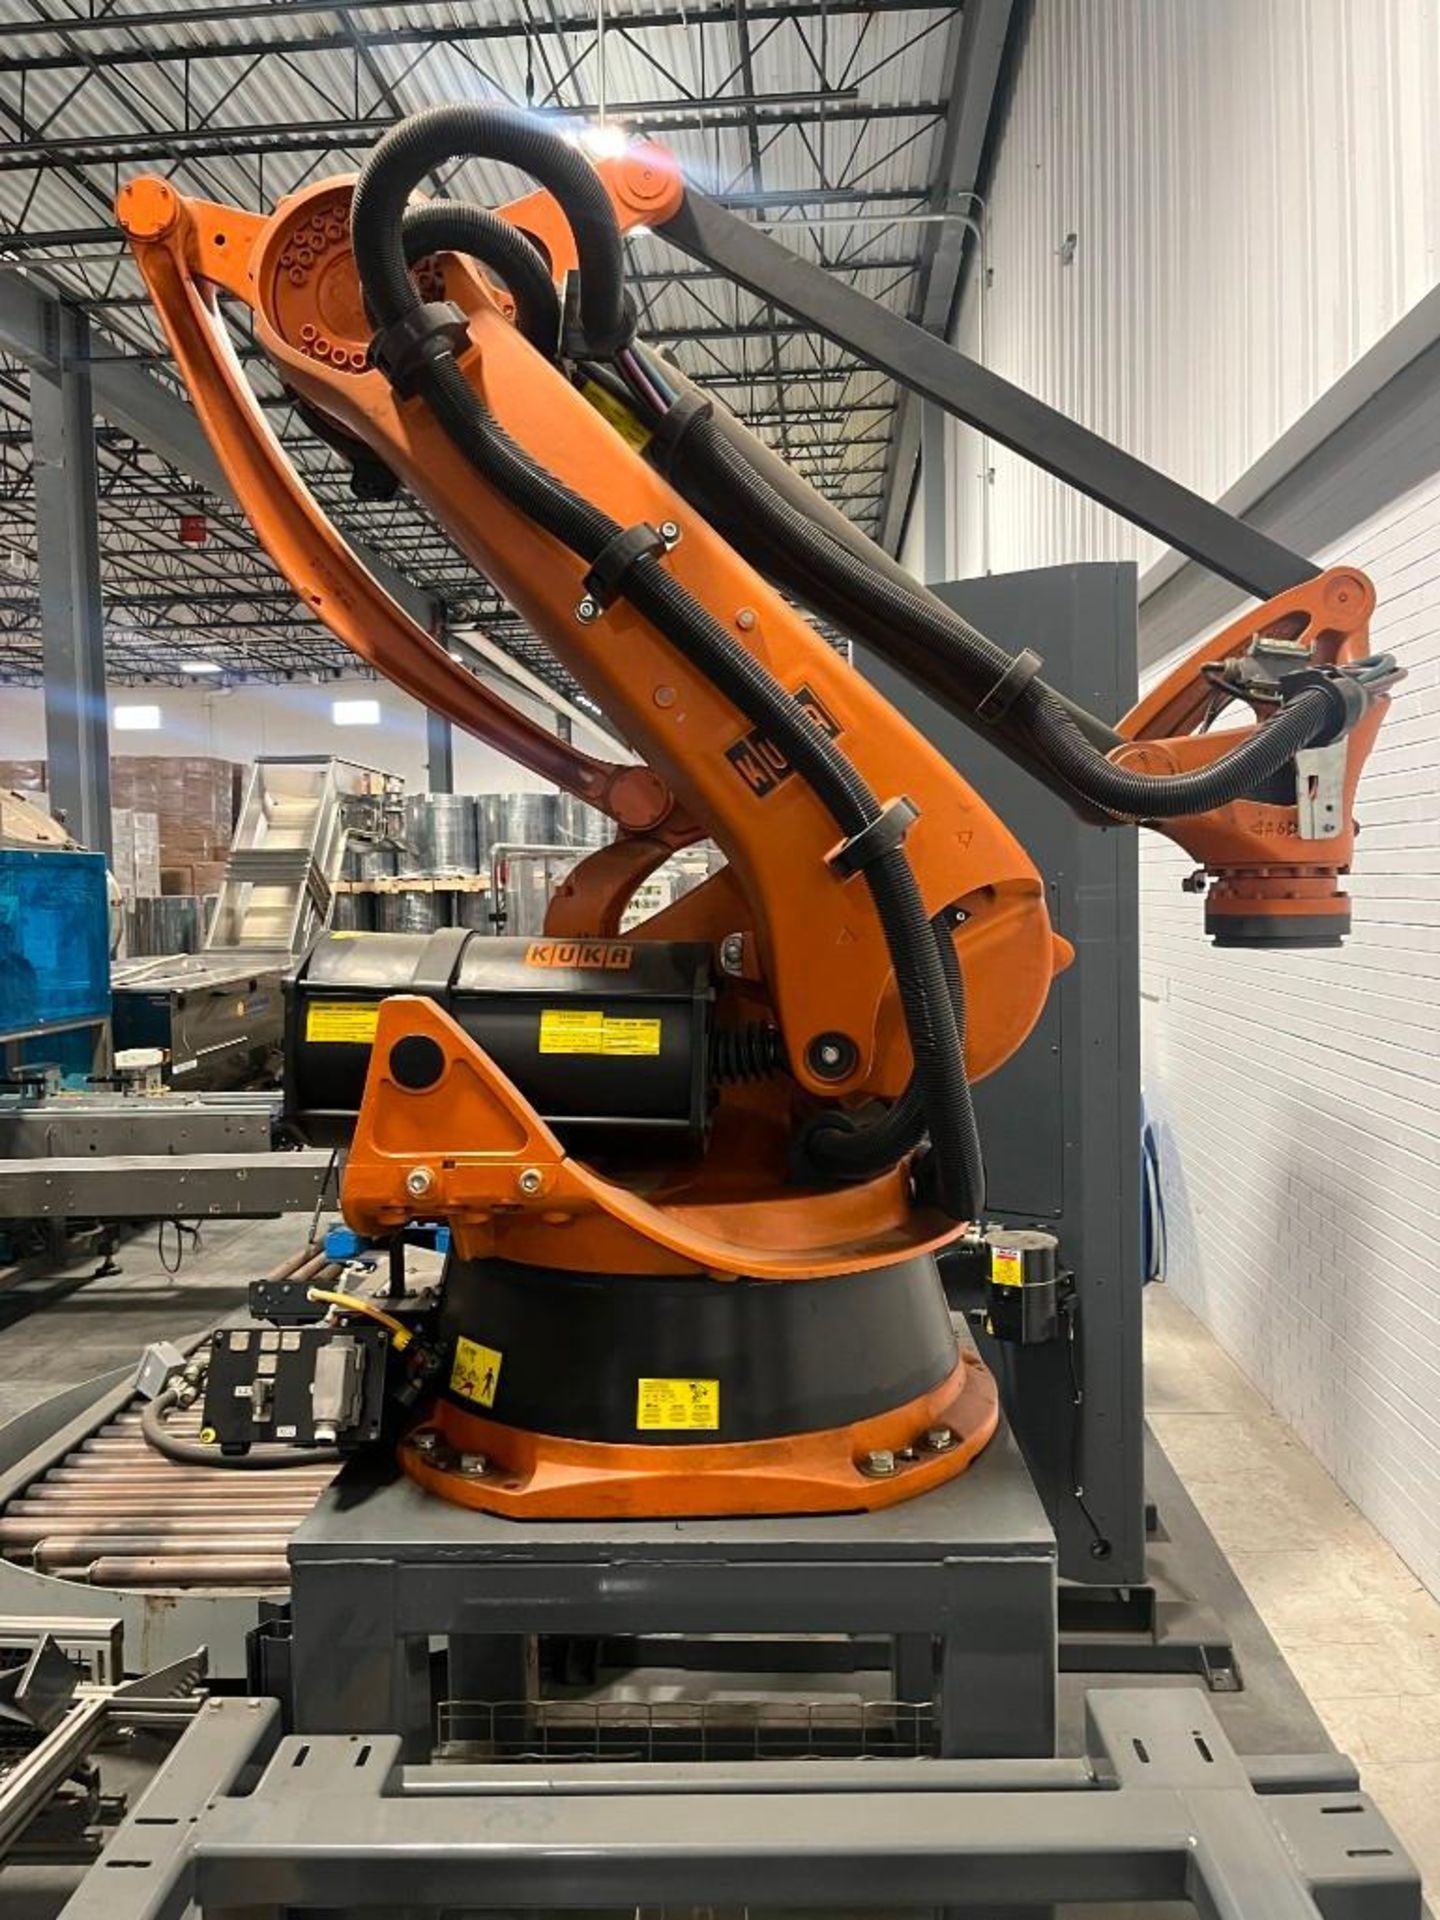 Wulftec/Kuka Robotic Palletizing System, Model ECOPAL. Includes (1) Wulftec automatic stretch wrappe - Image 34 of 75